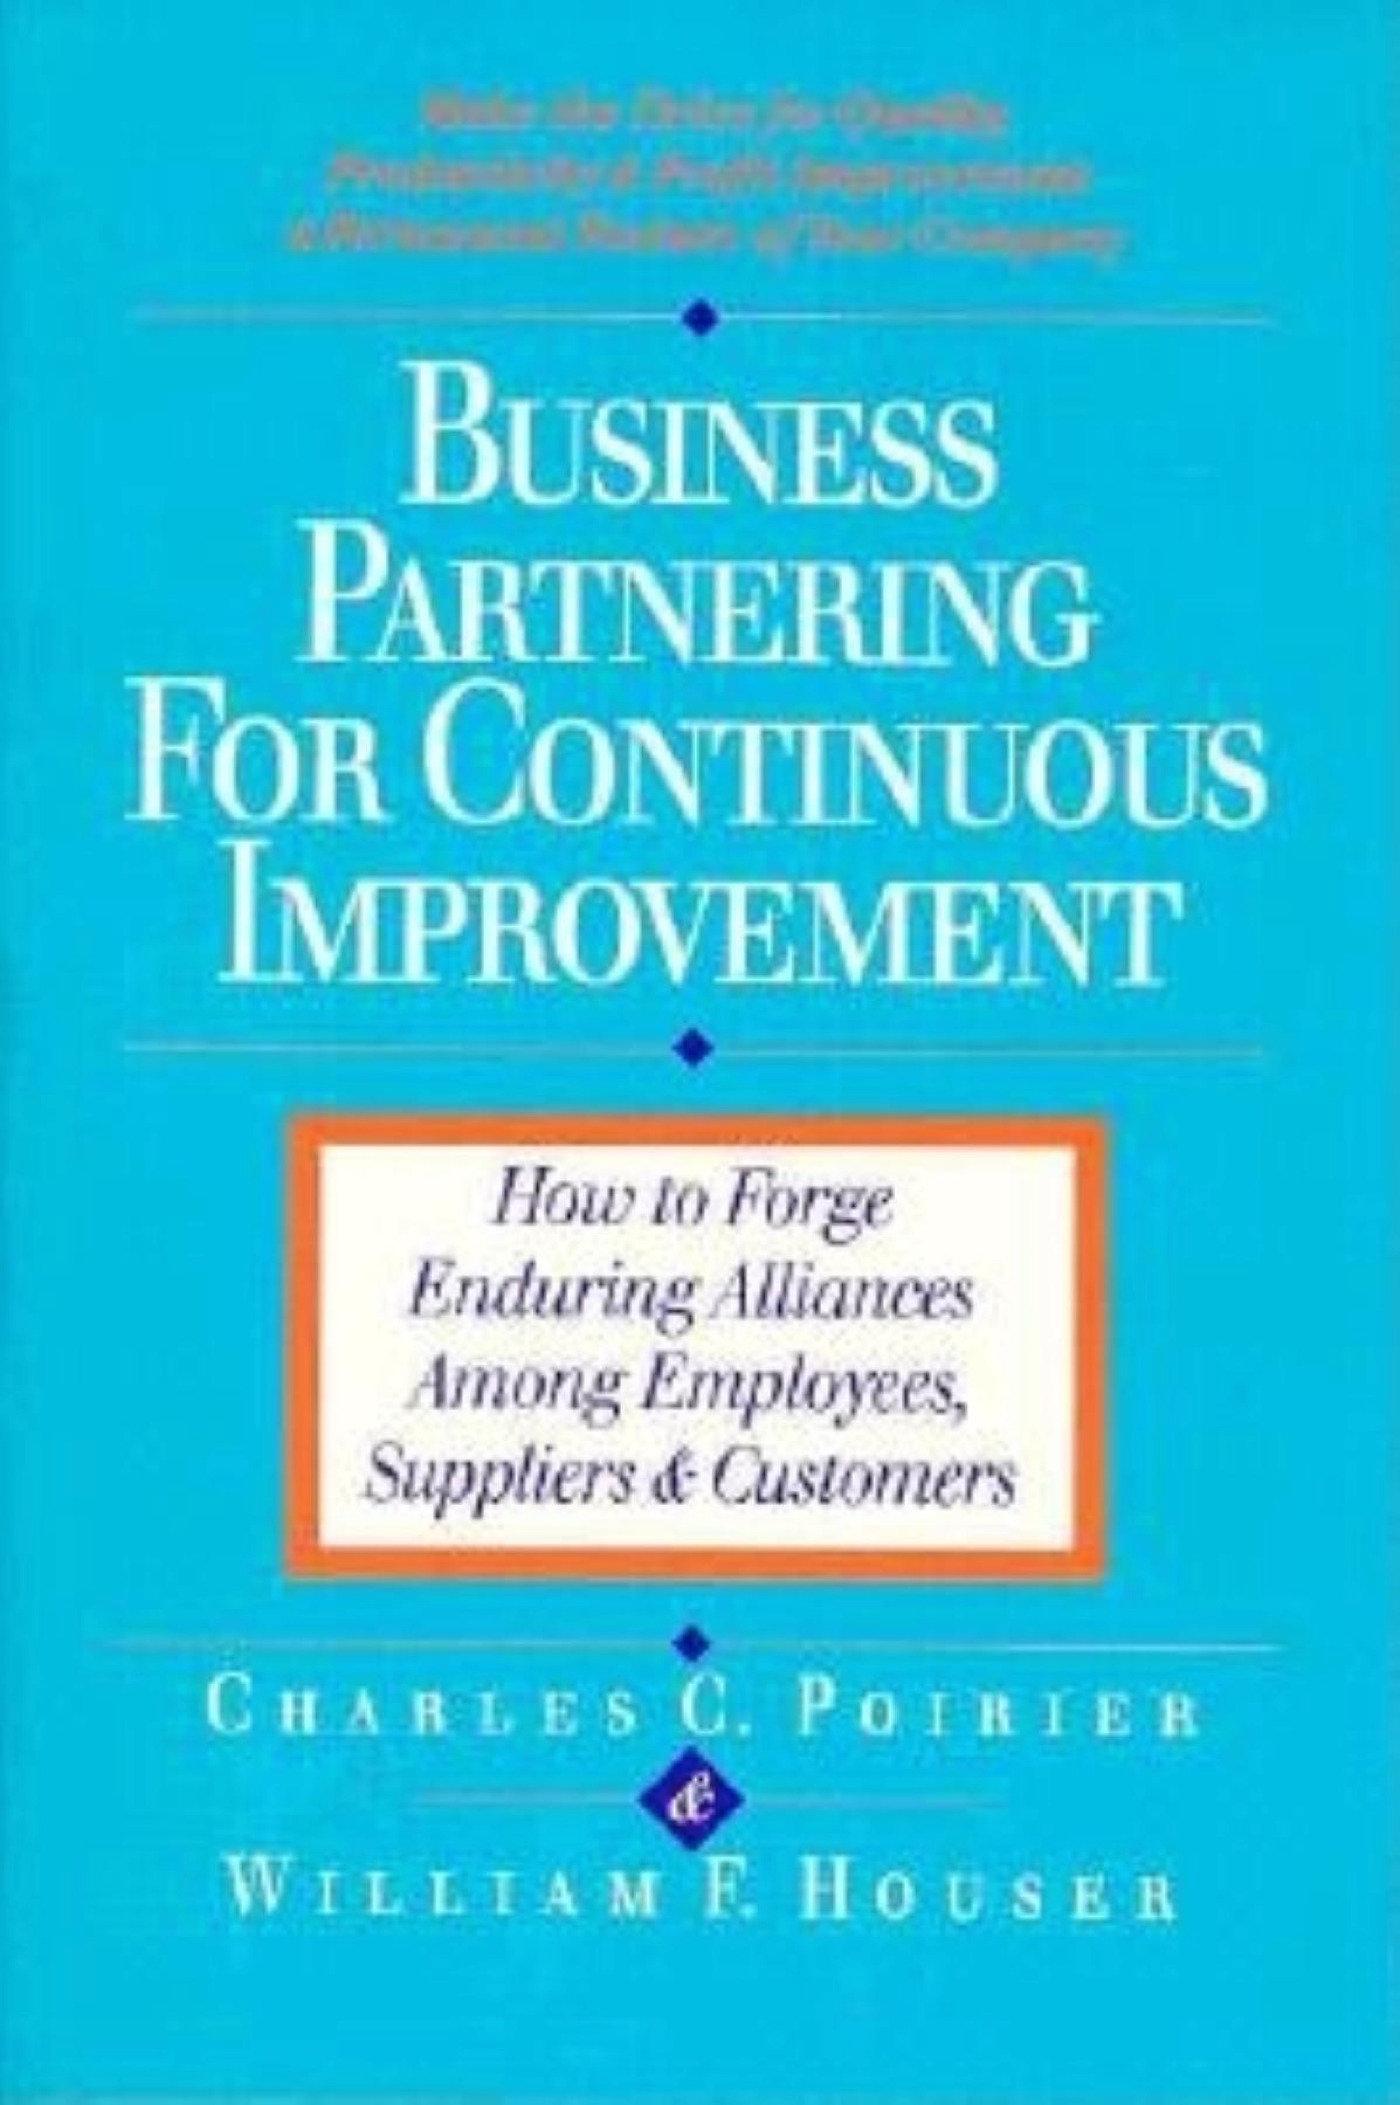 Business Partnering for Continuous Improvement - Charles C. Poirier William F. Houser